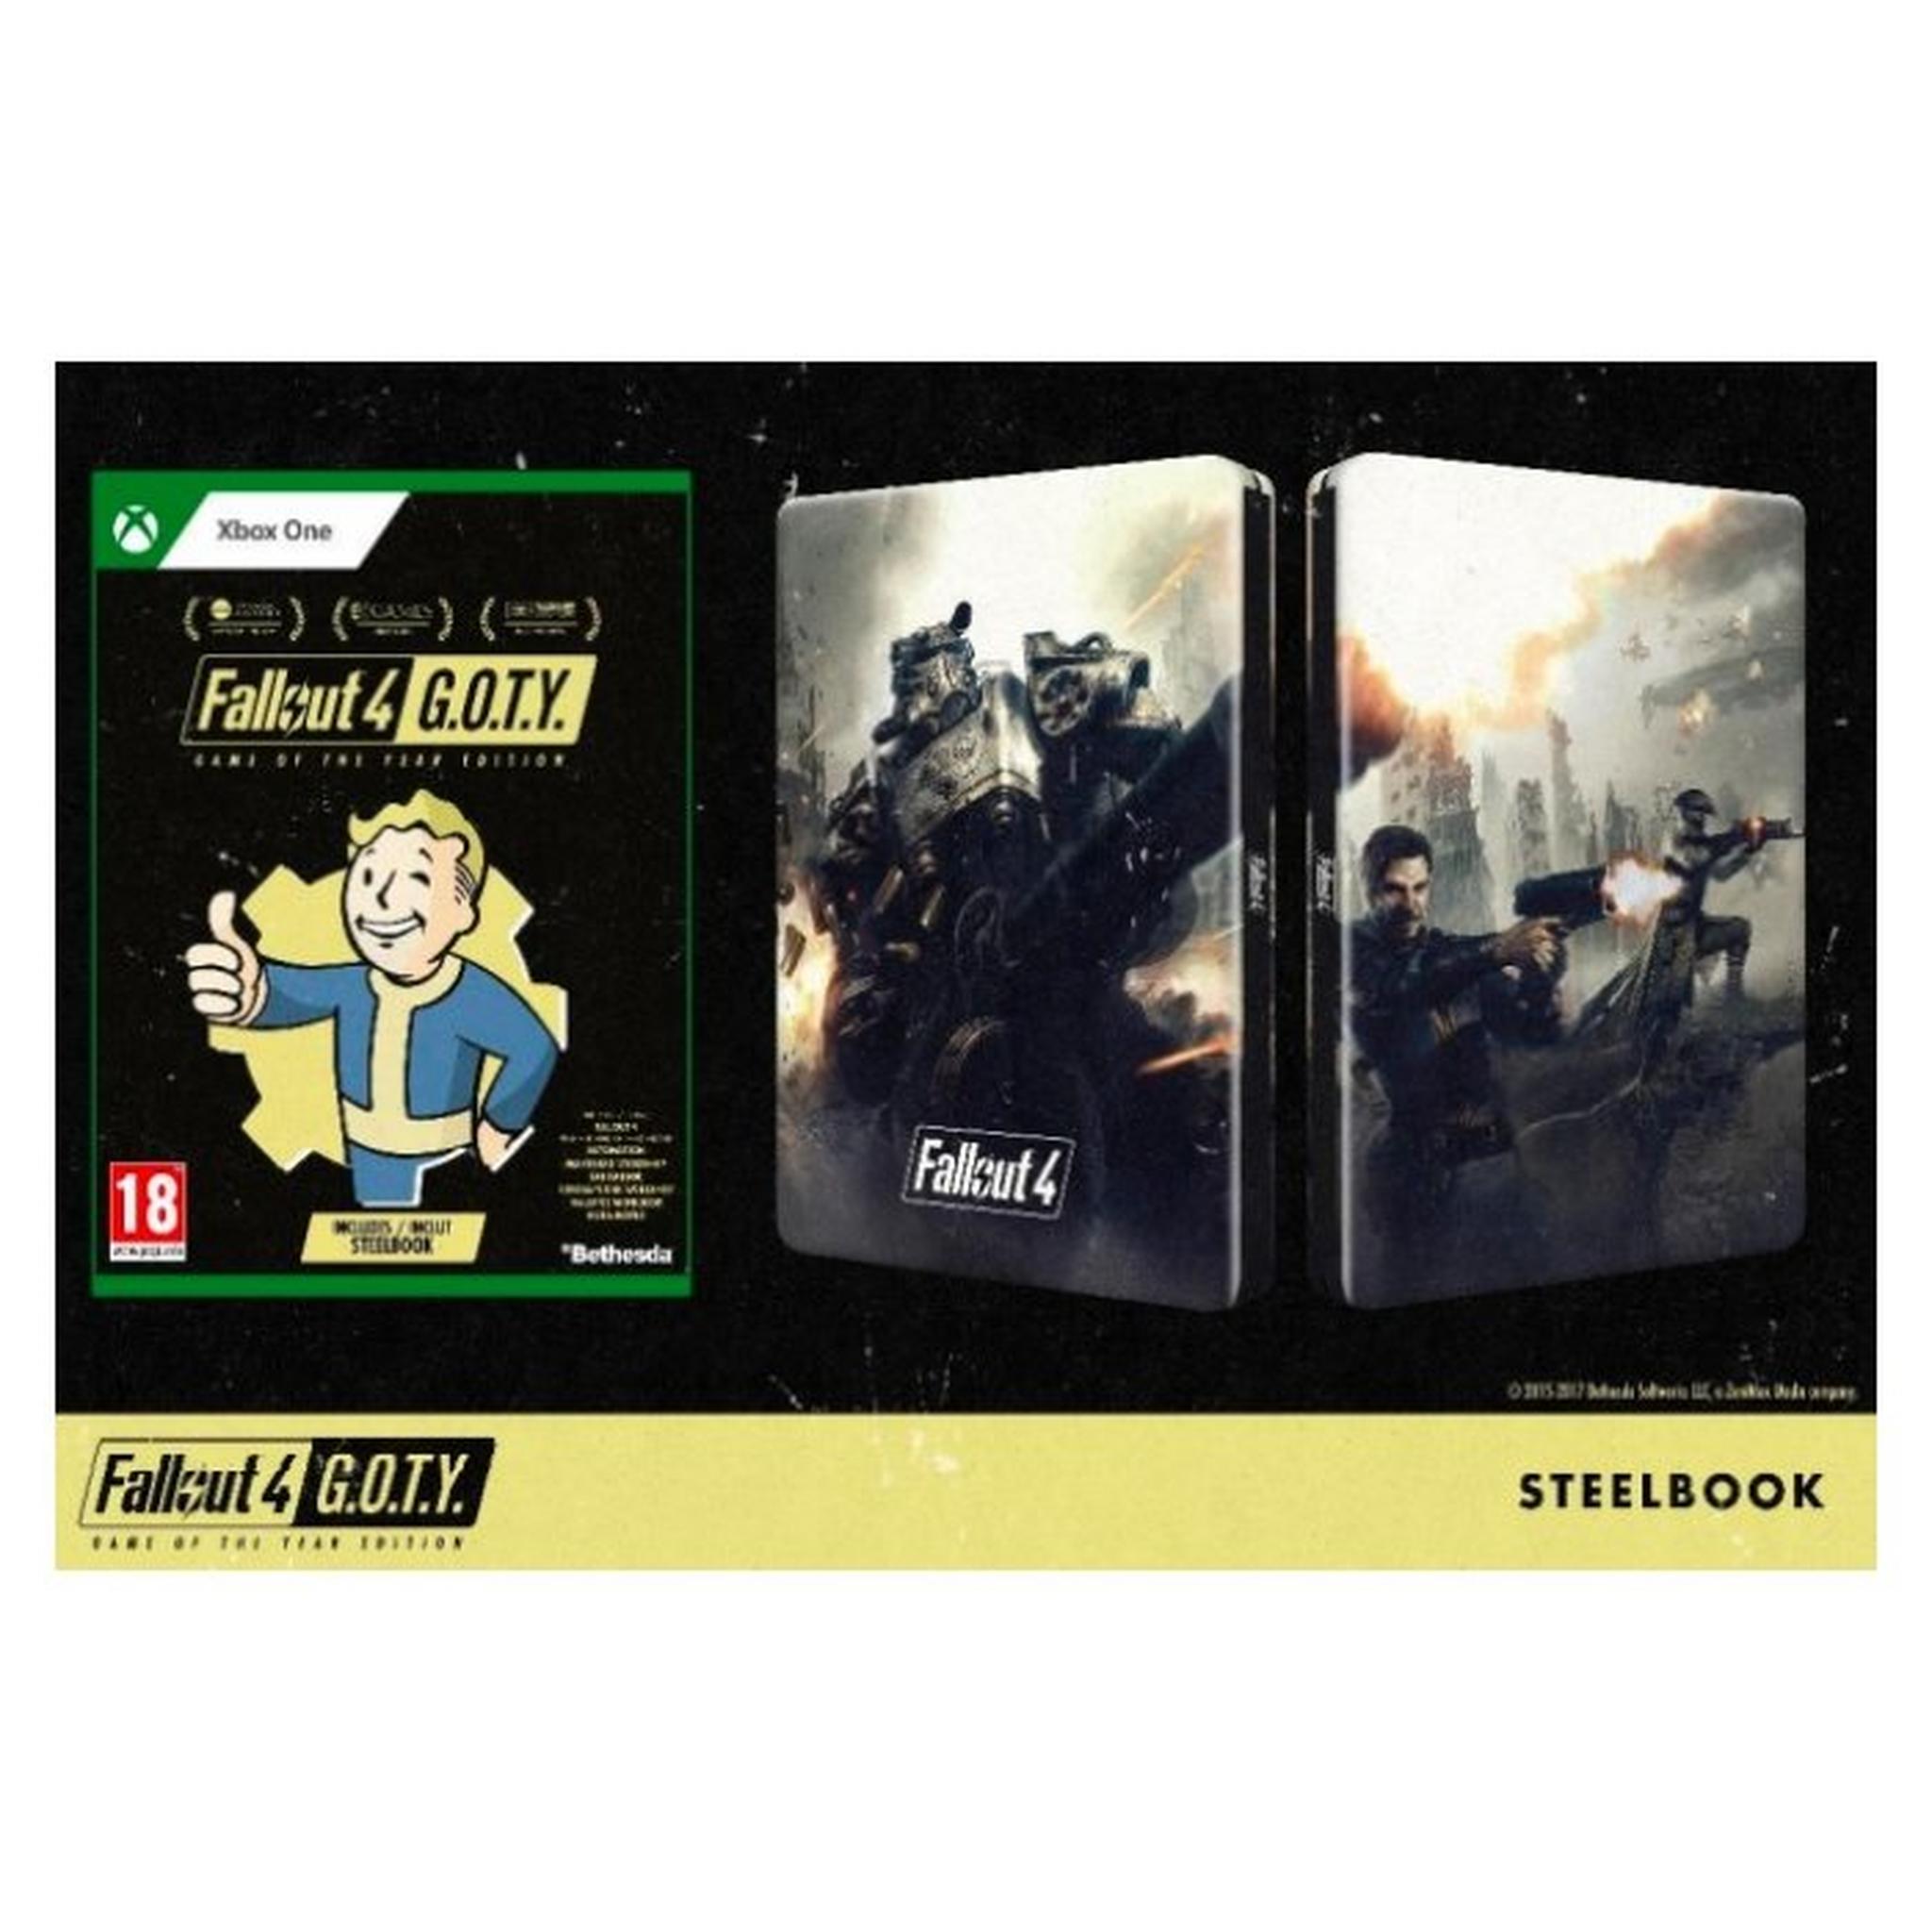 Fallout 4 GOTY Fallout 25th Anniversary -Steelbook Edition - Xbox One Game